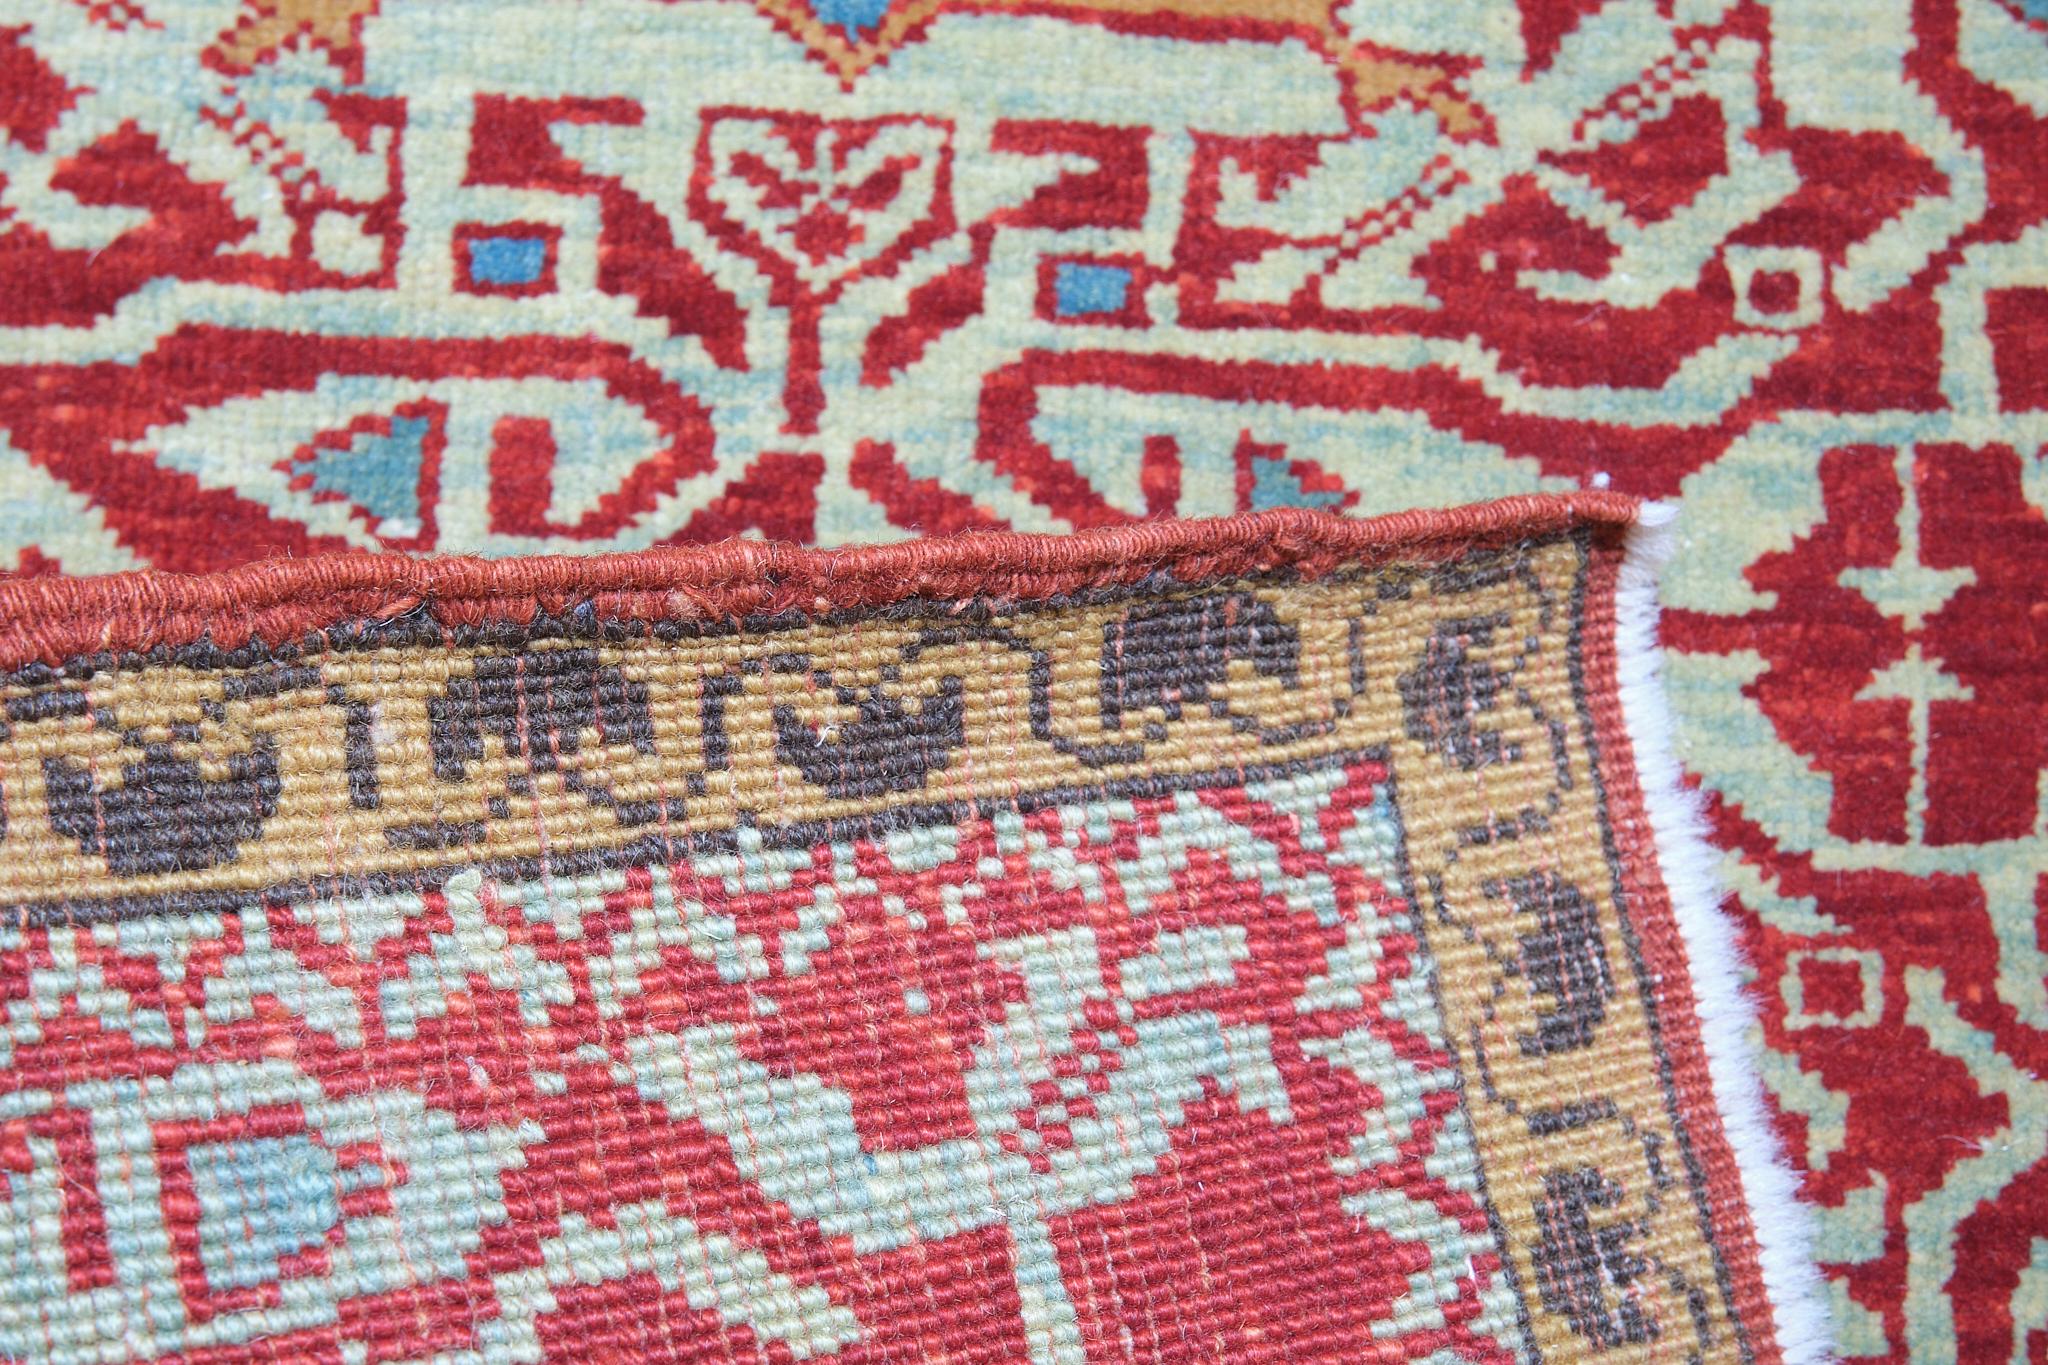 Vegetable Dyed Ararat Rugs Mamluk Wagireh Rug with Two Medallions Revival Carpet Natural Dyed For Sale